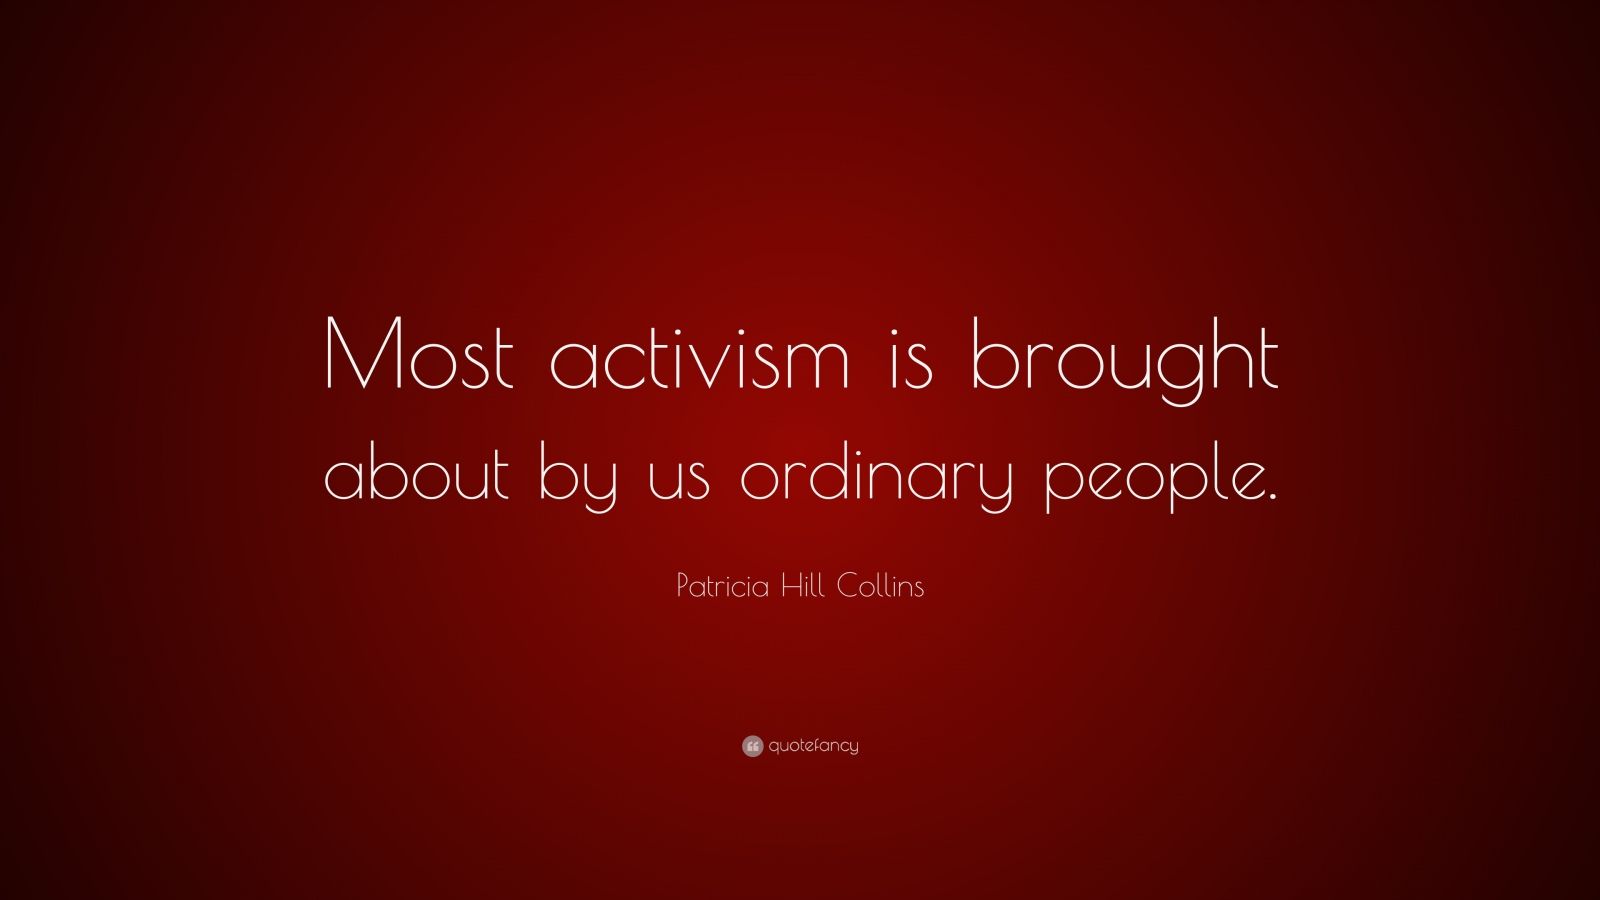 Patricia Hill Collins Quotes (14 wallpapers) - Quotefancy